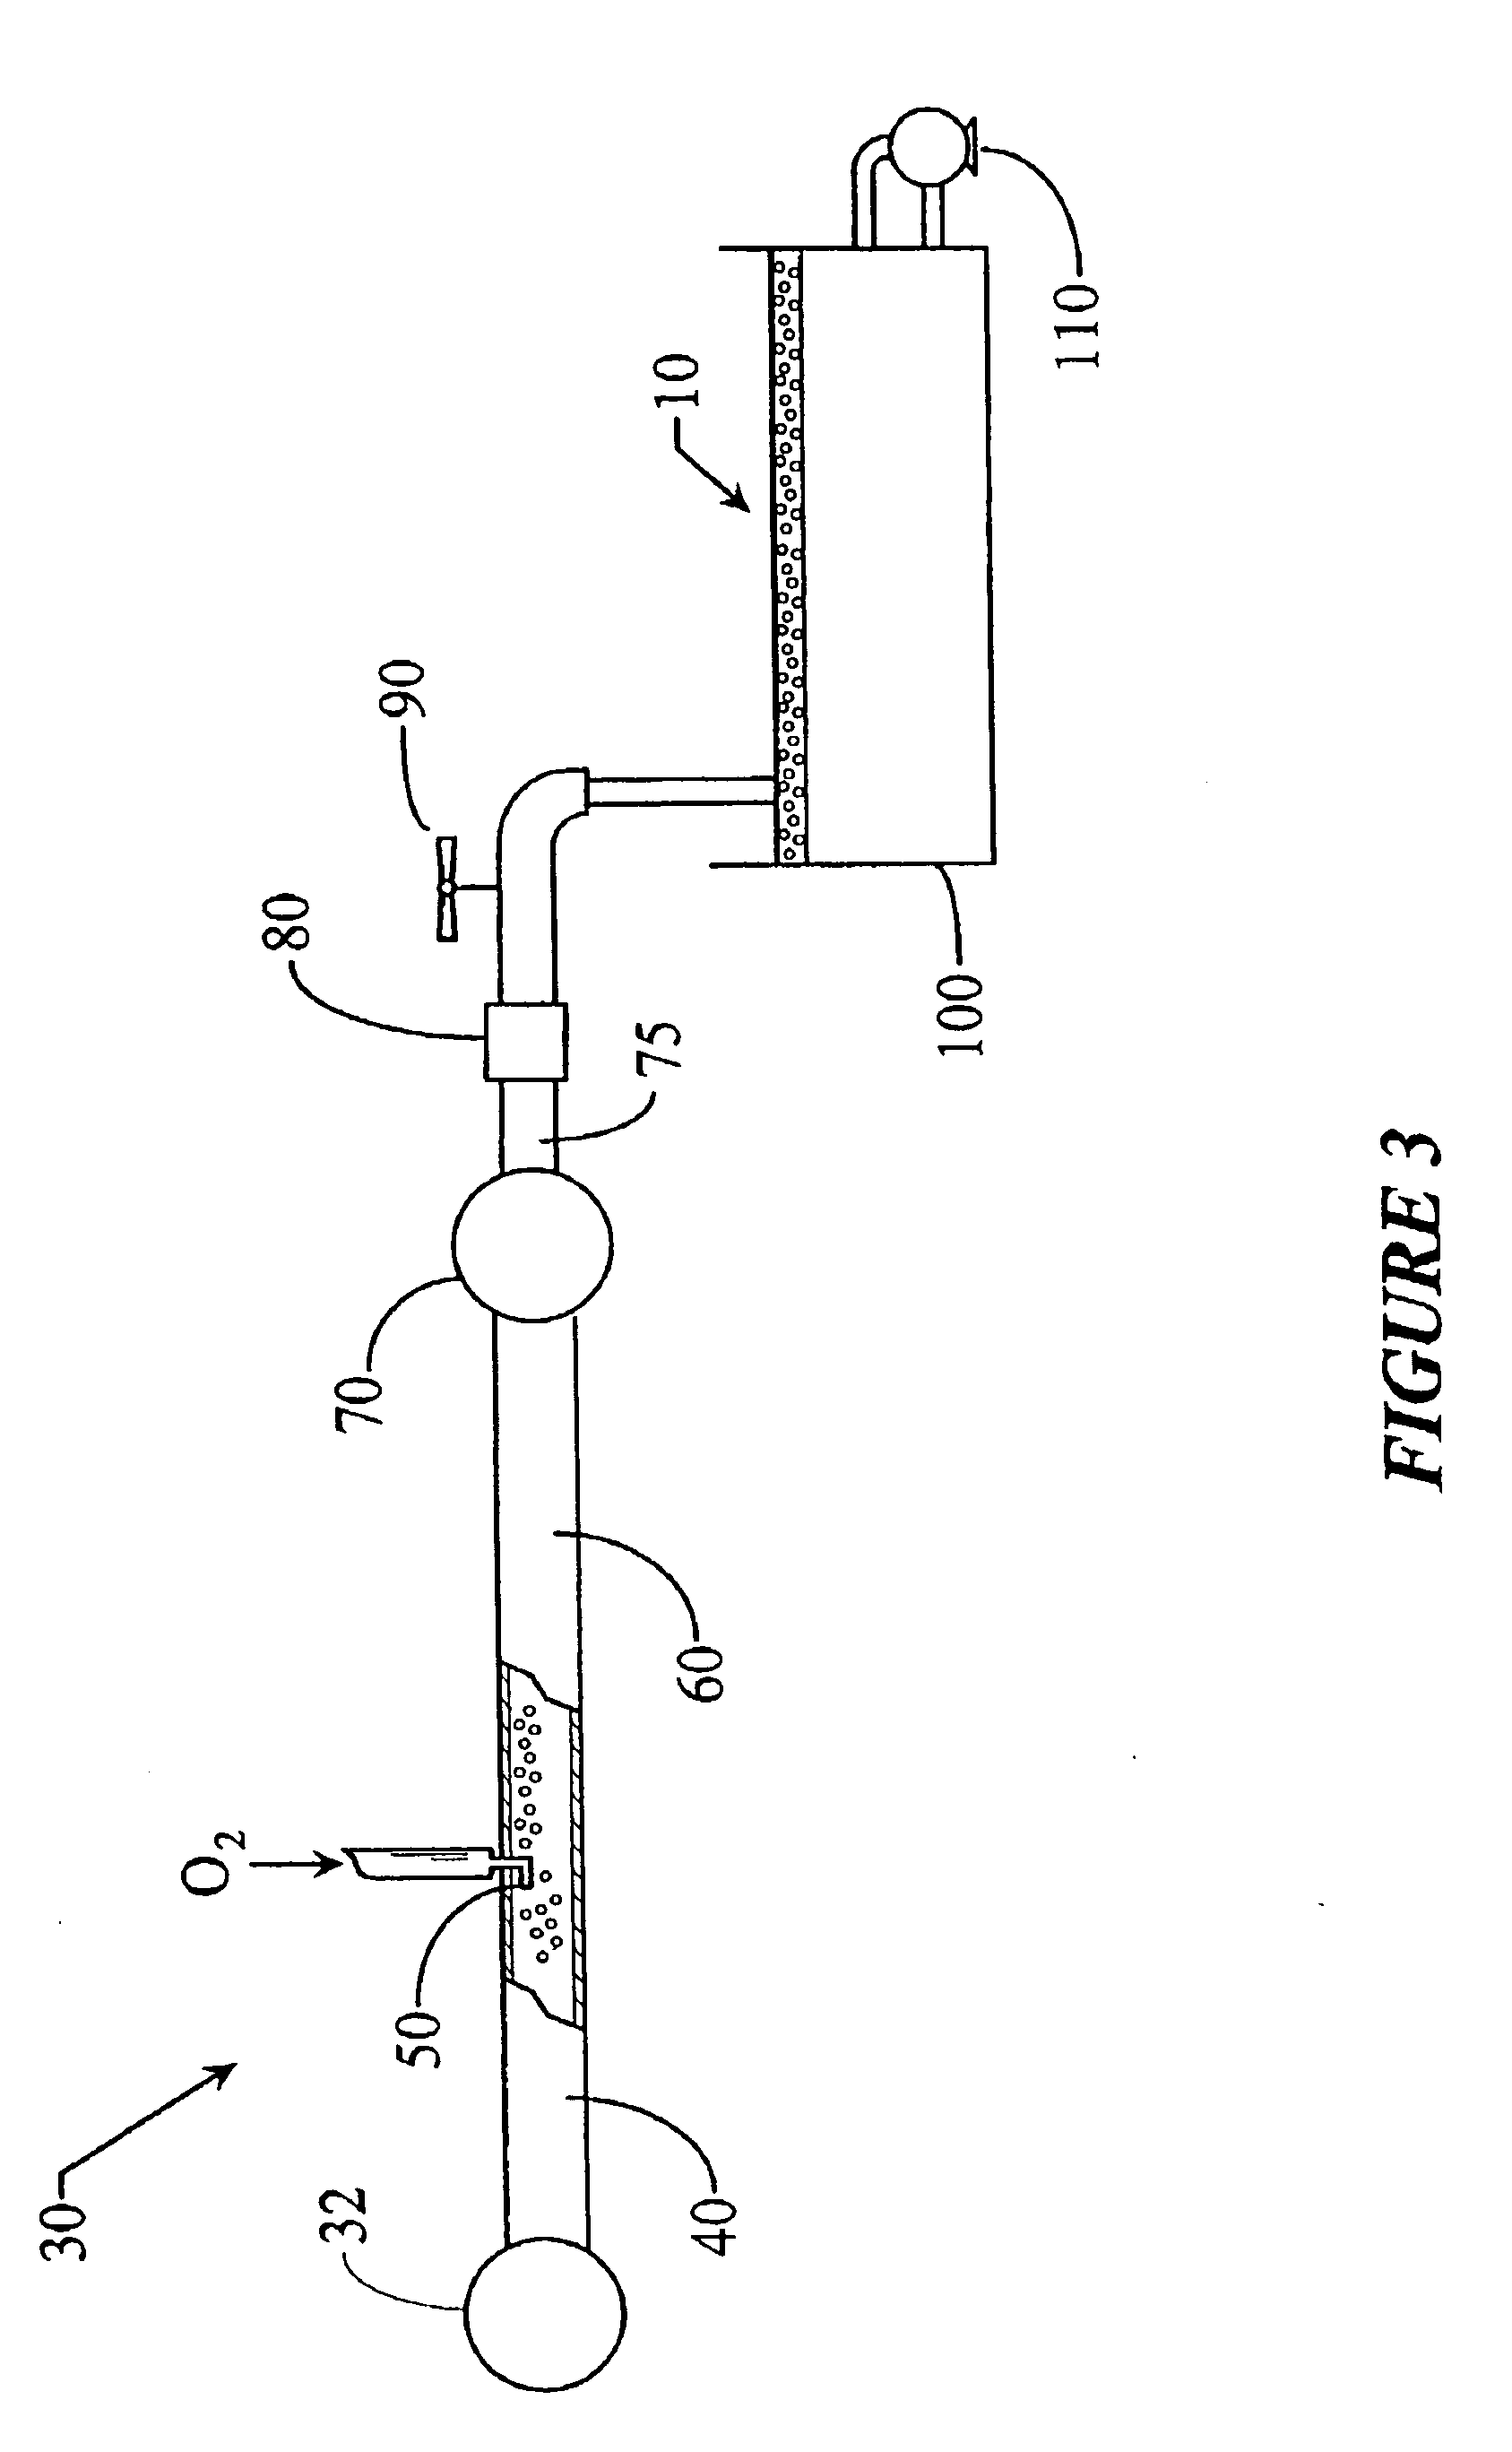 Two-phase oxygenated solution and method of use